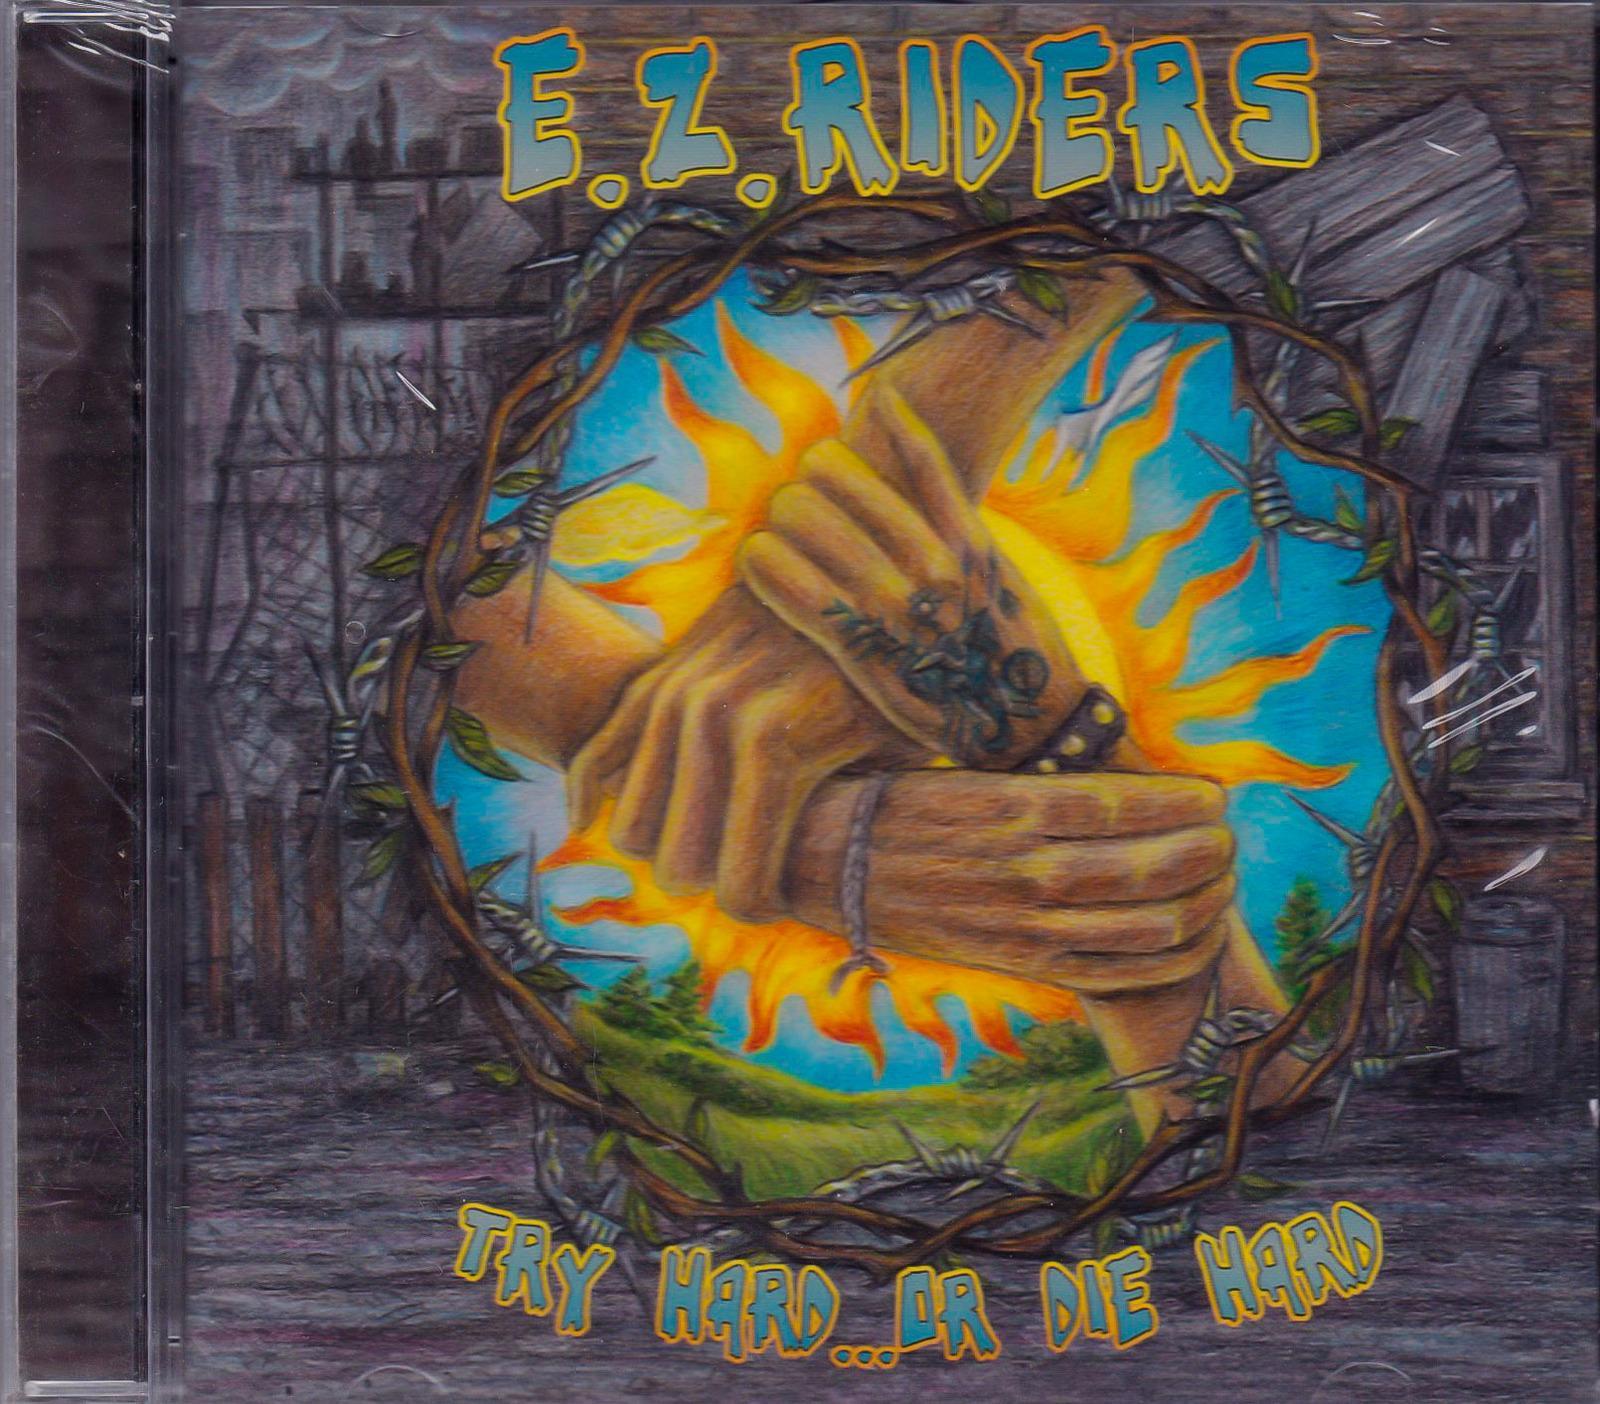 Try Hard Or Die Hard -E.Z.Riders CD